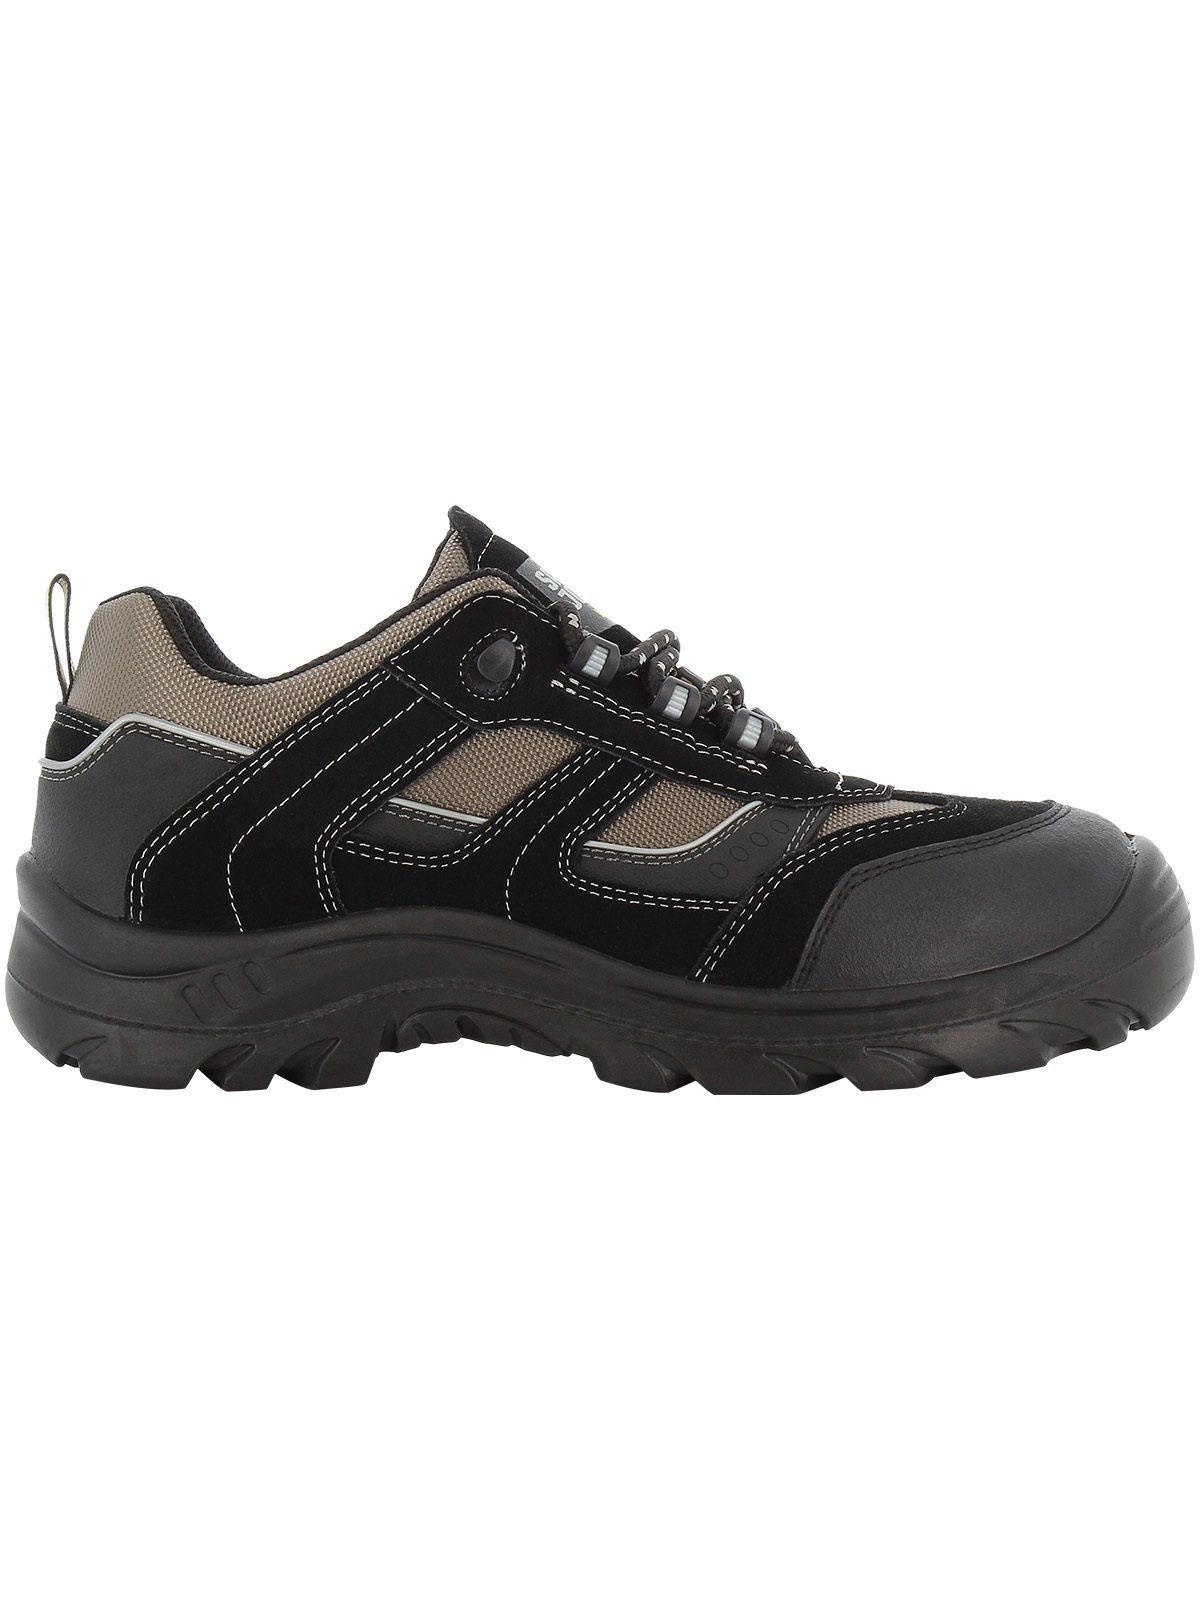 SafetyJogger S3 Jumper Jogger Safety Arbeitsschuh